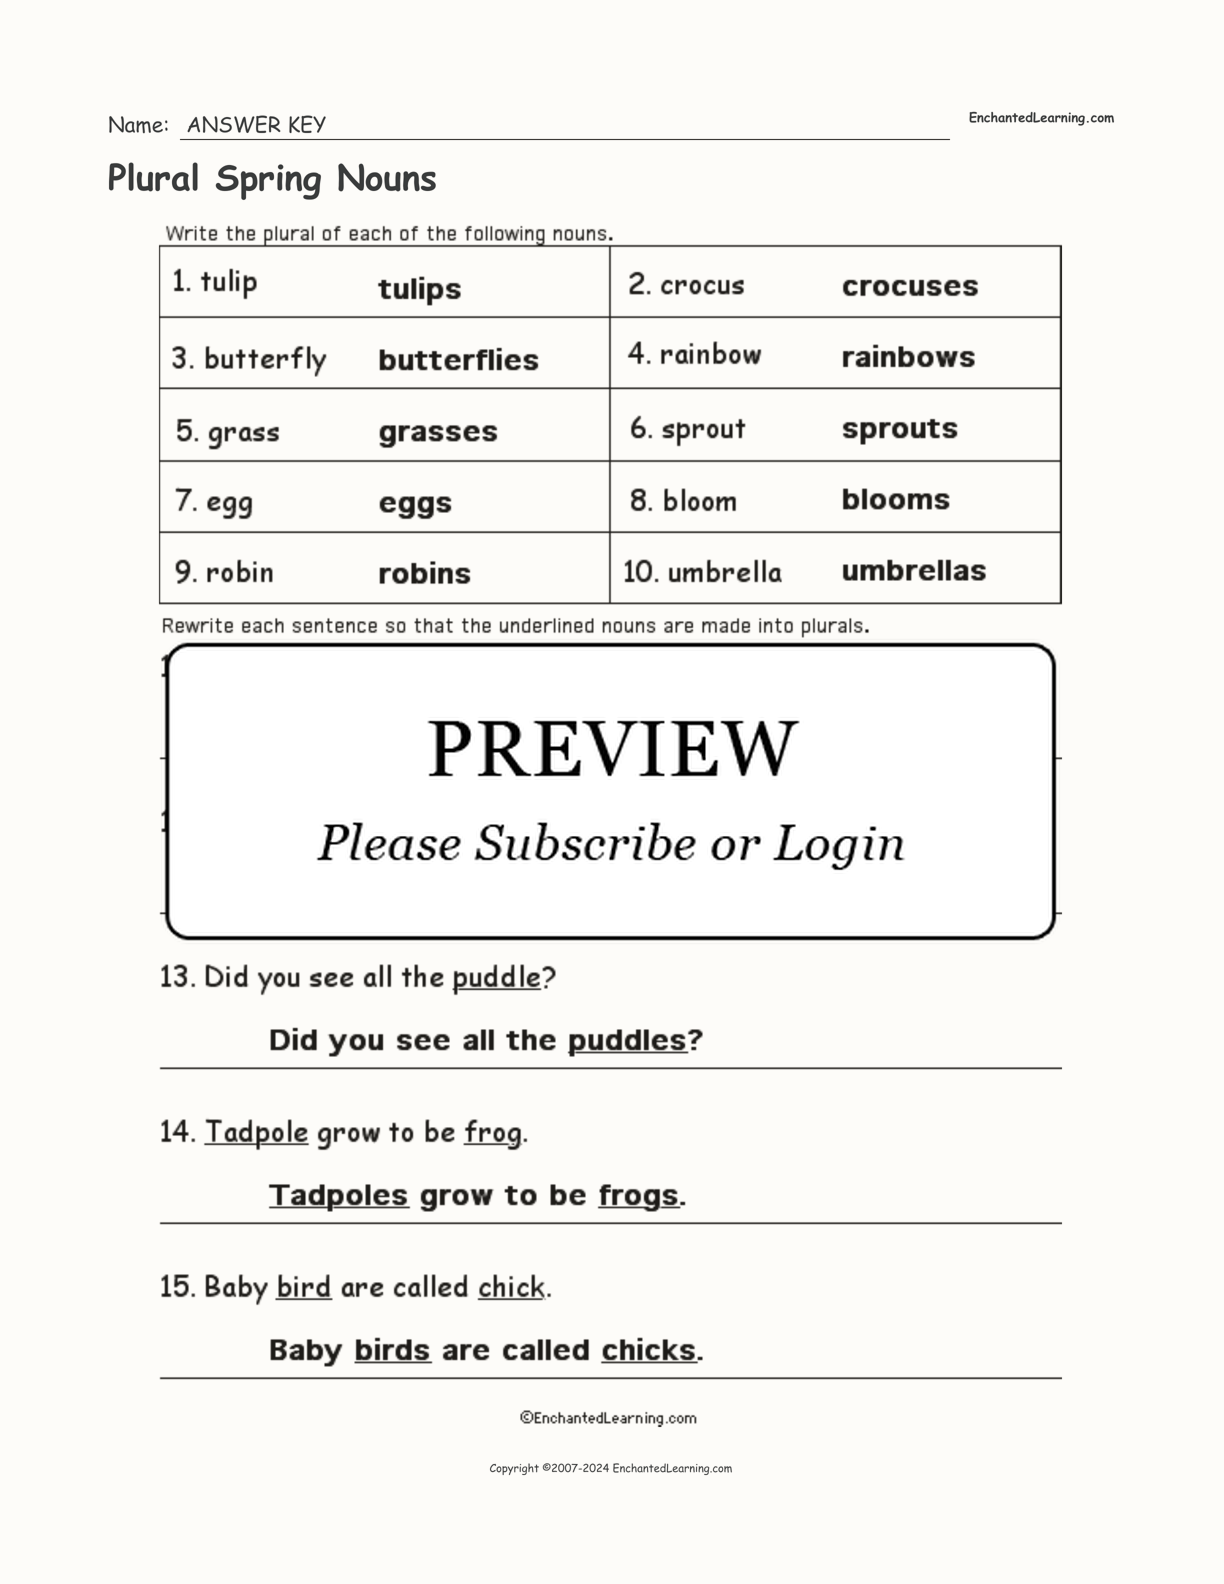 Plural Spring Nouns interactive worksheet page 2